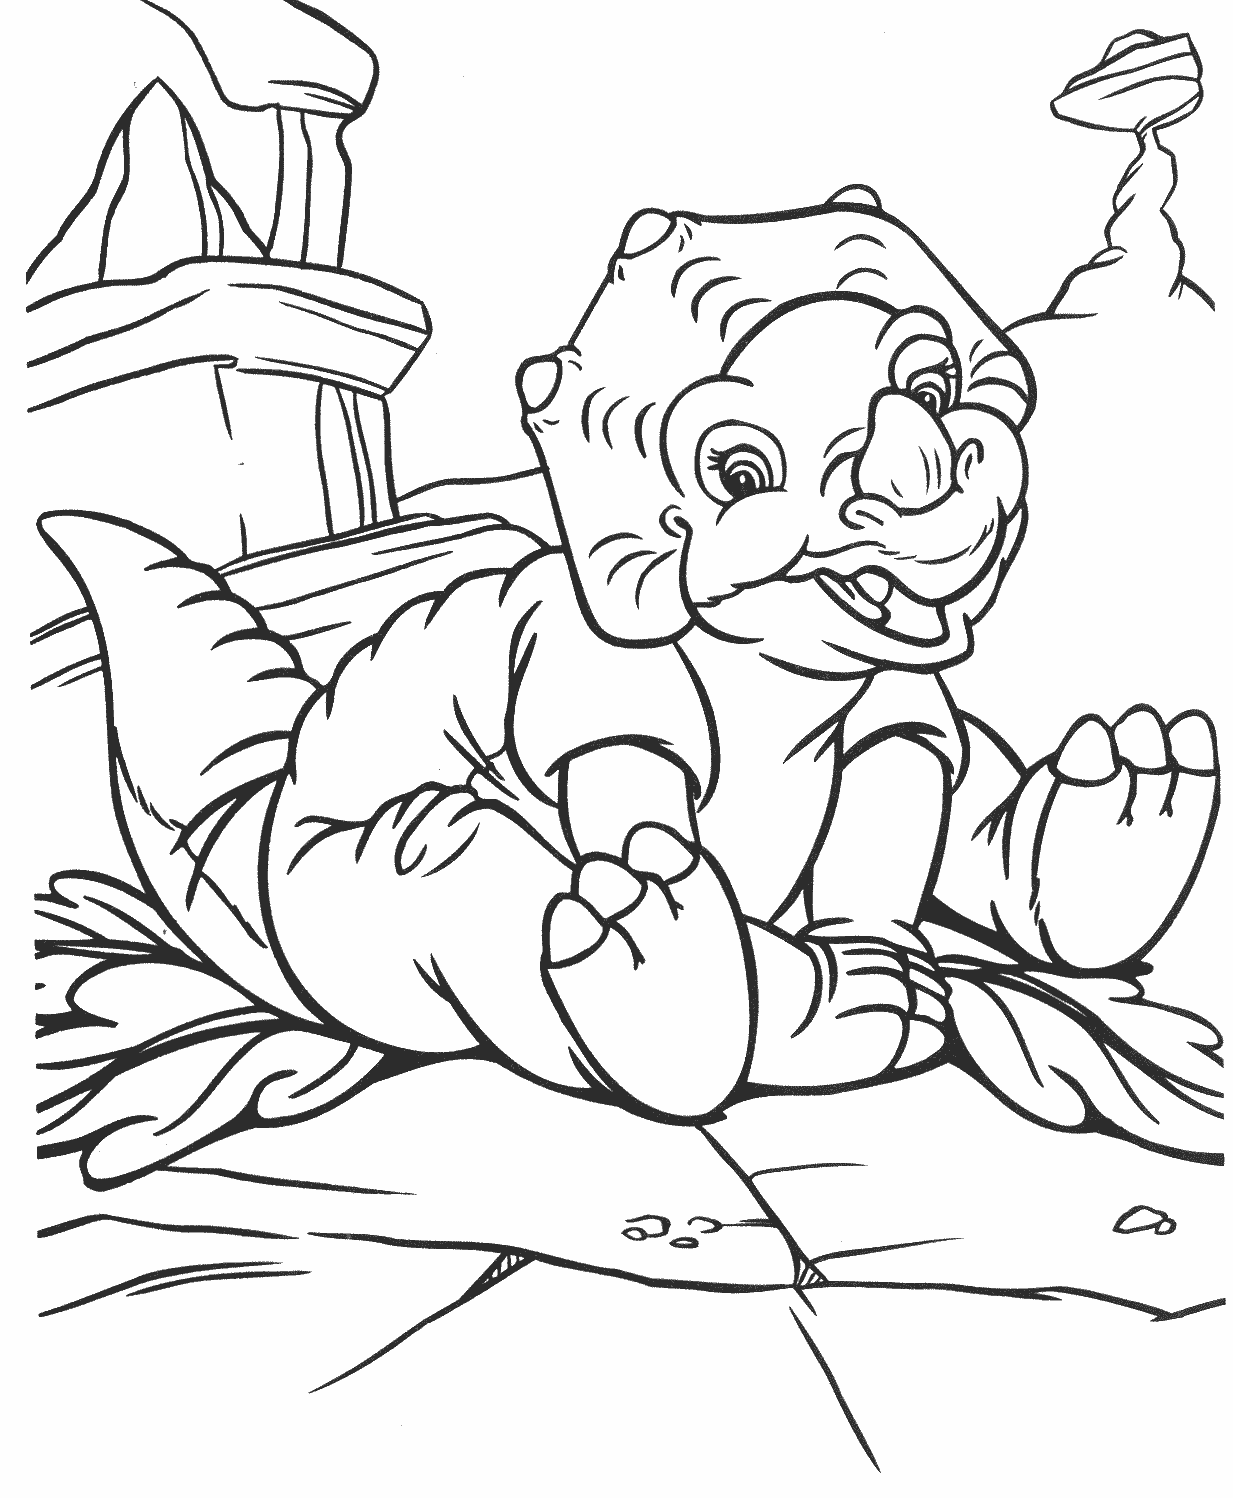 Dinosaurs Coloring Pages for boys lf4 Printable 2020 0319 Coloring4free